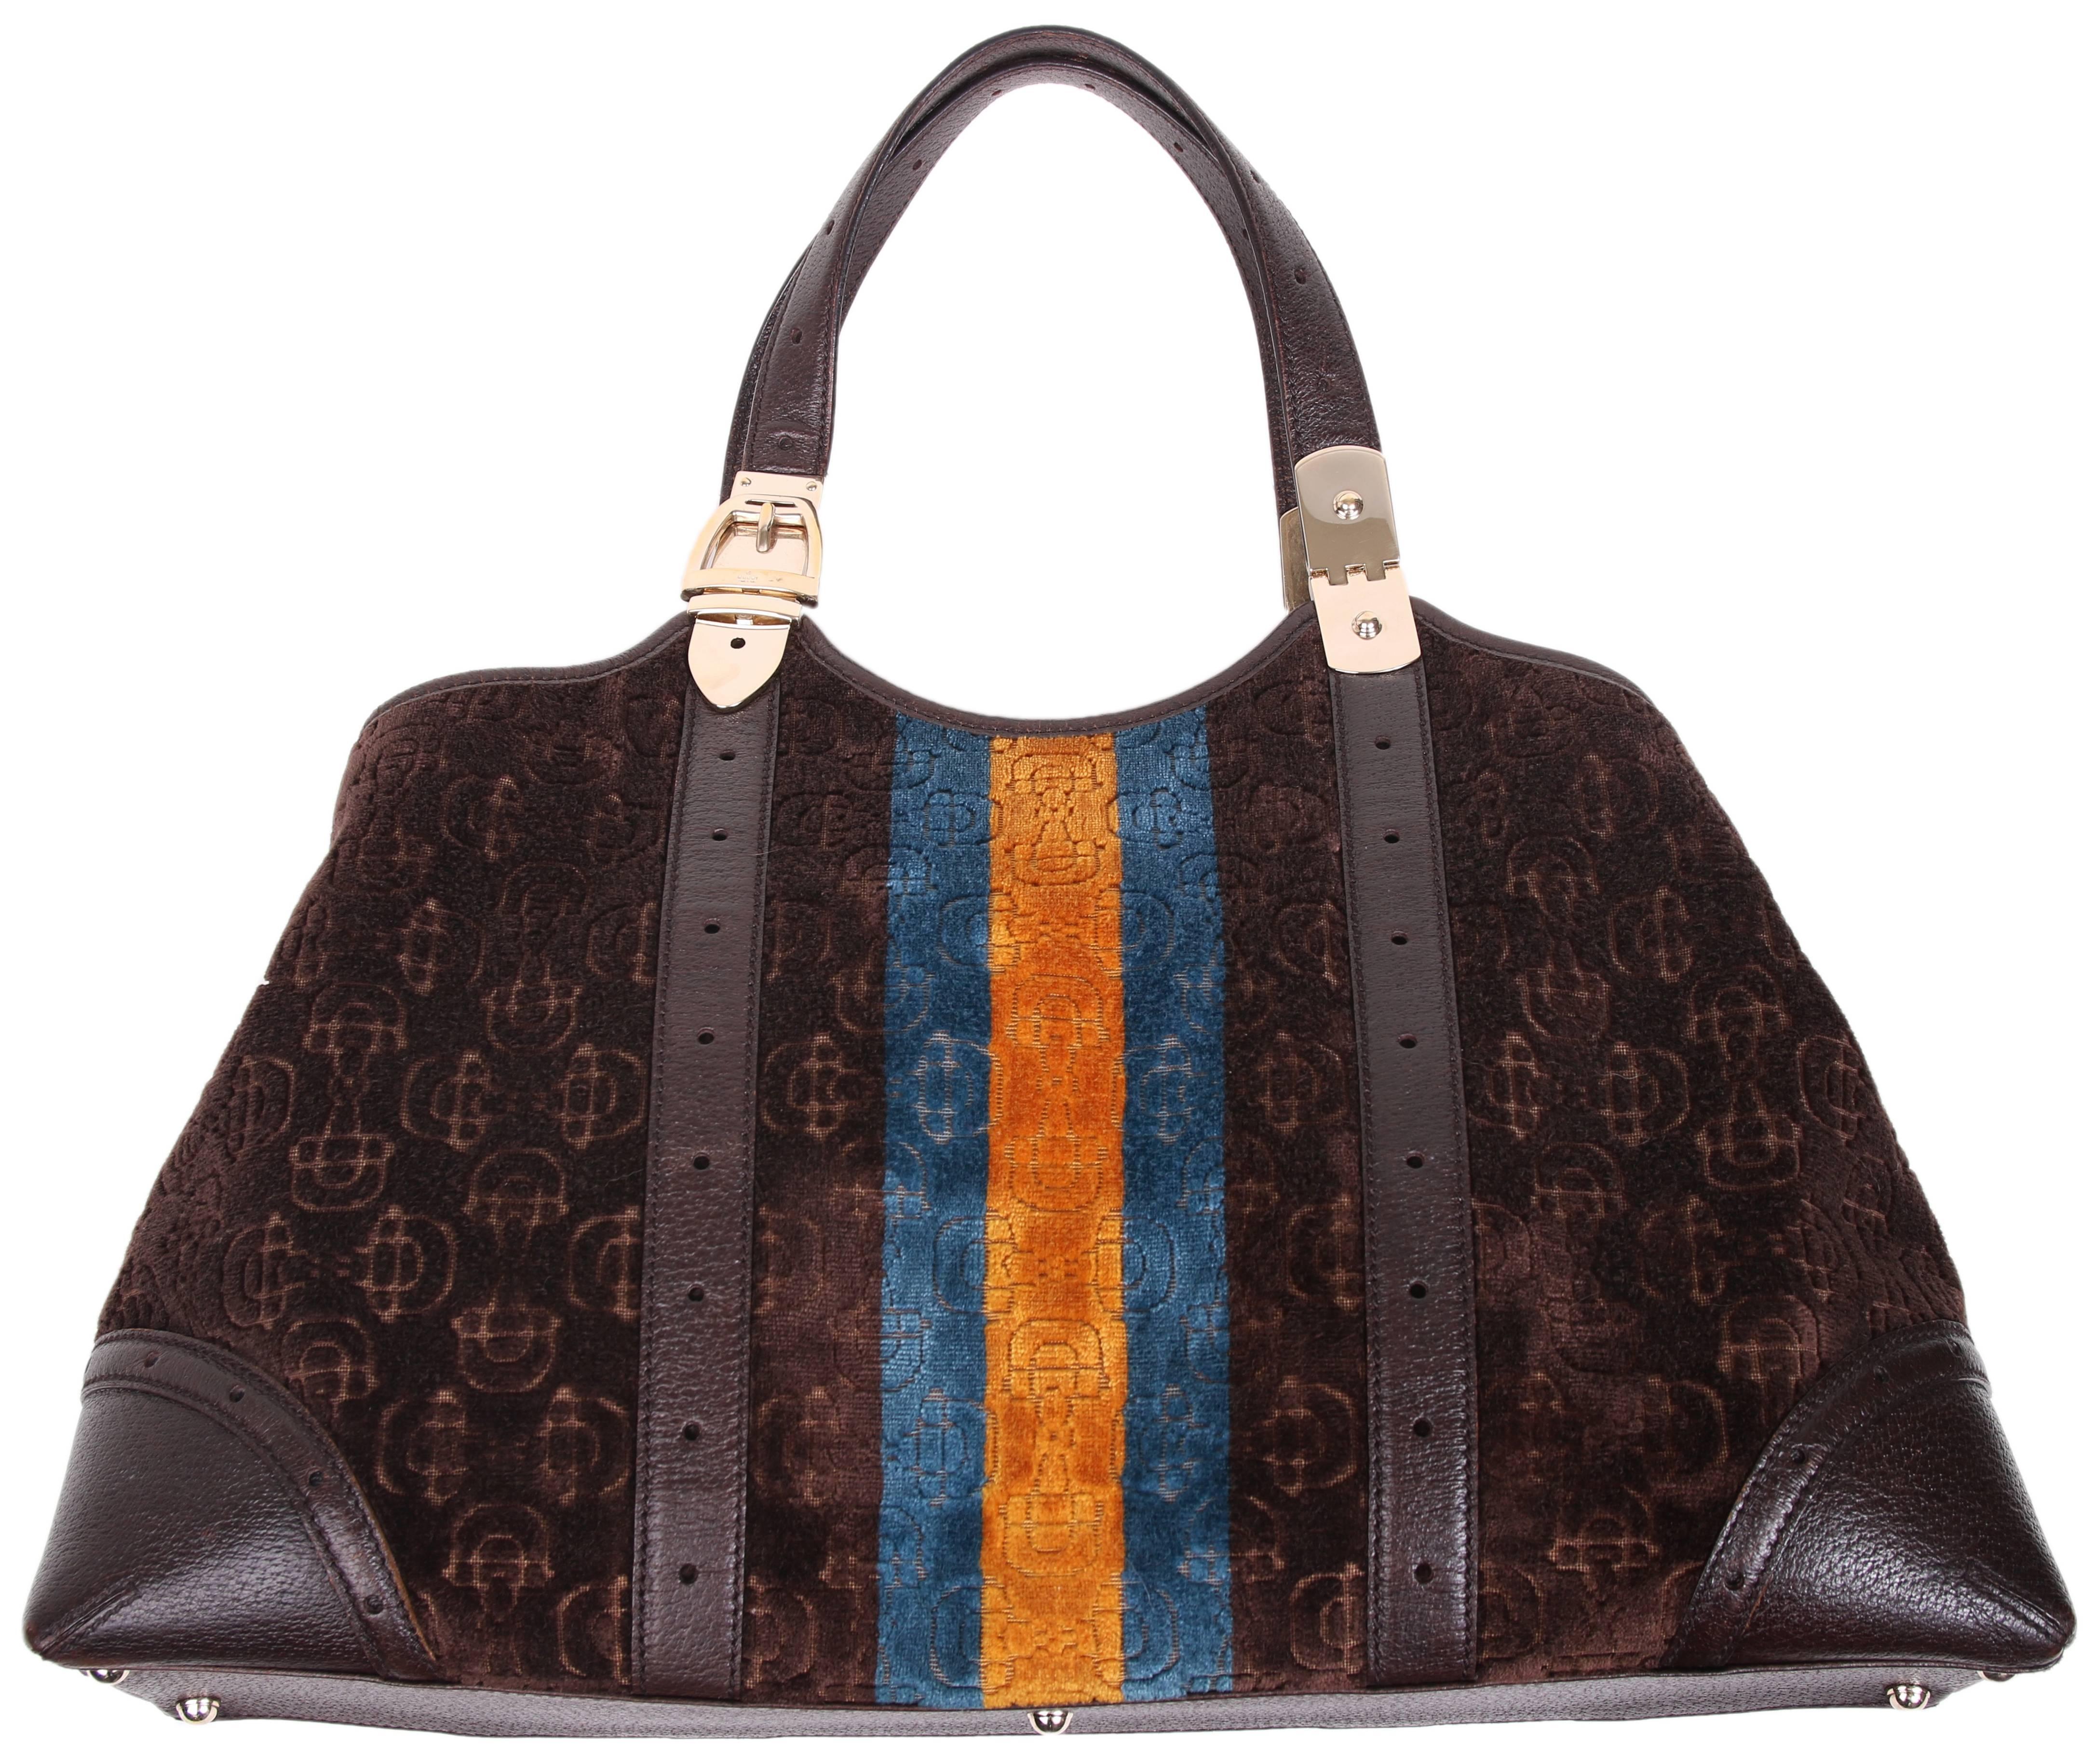 Gucci horse bit logo cut velvet handbag with leather straps and trim. Bag features a teal and burnt orange racer stripe down center front and back and the hardware is a light gold. Interior has plenty of room and features a zippered wall pocket.